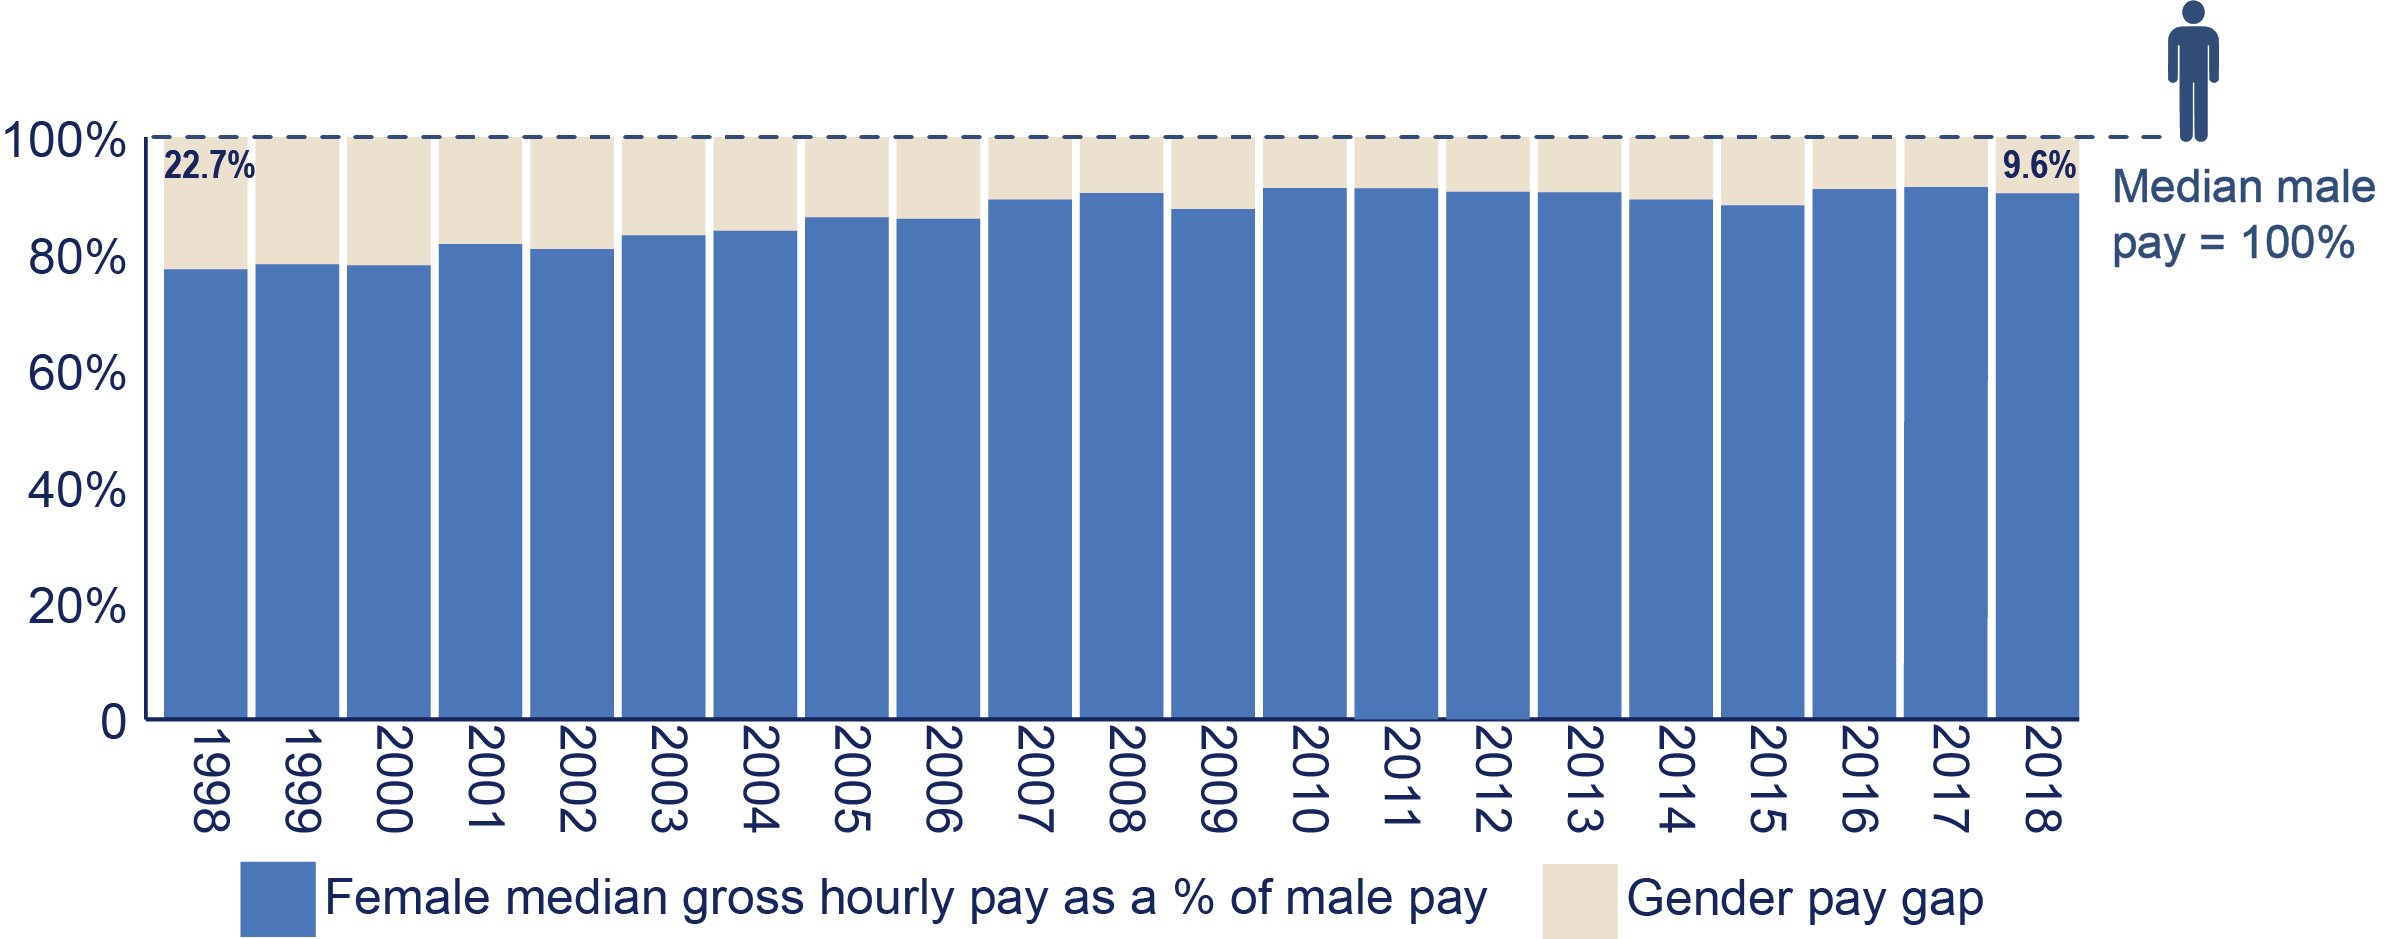 What is Pay Gap in Northern Ireland 2019? - Research Matters